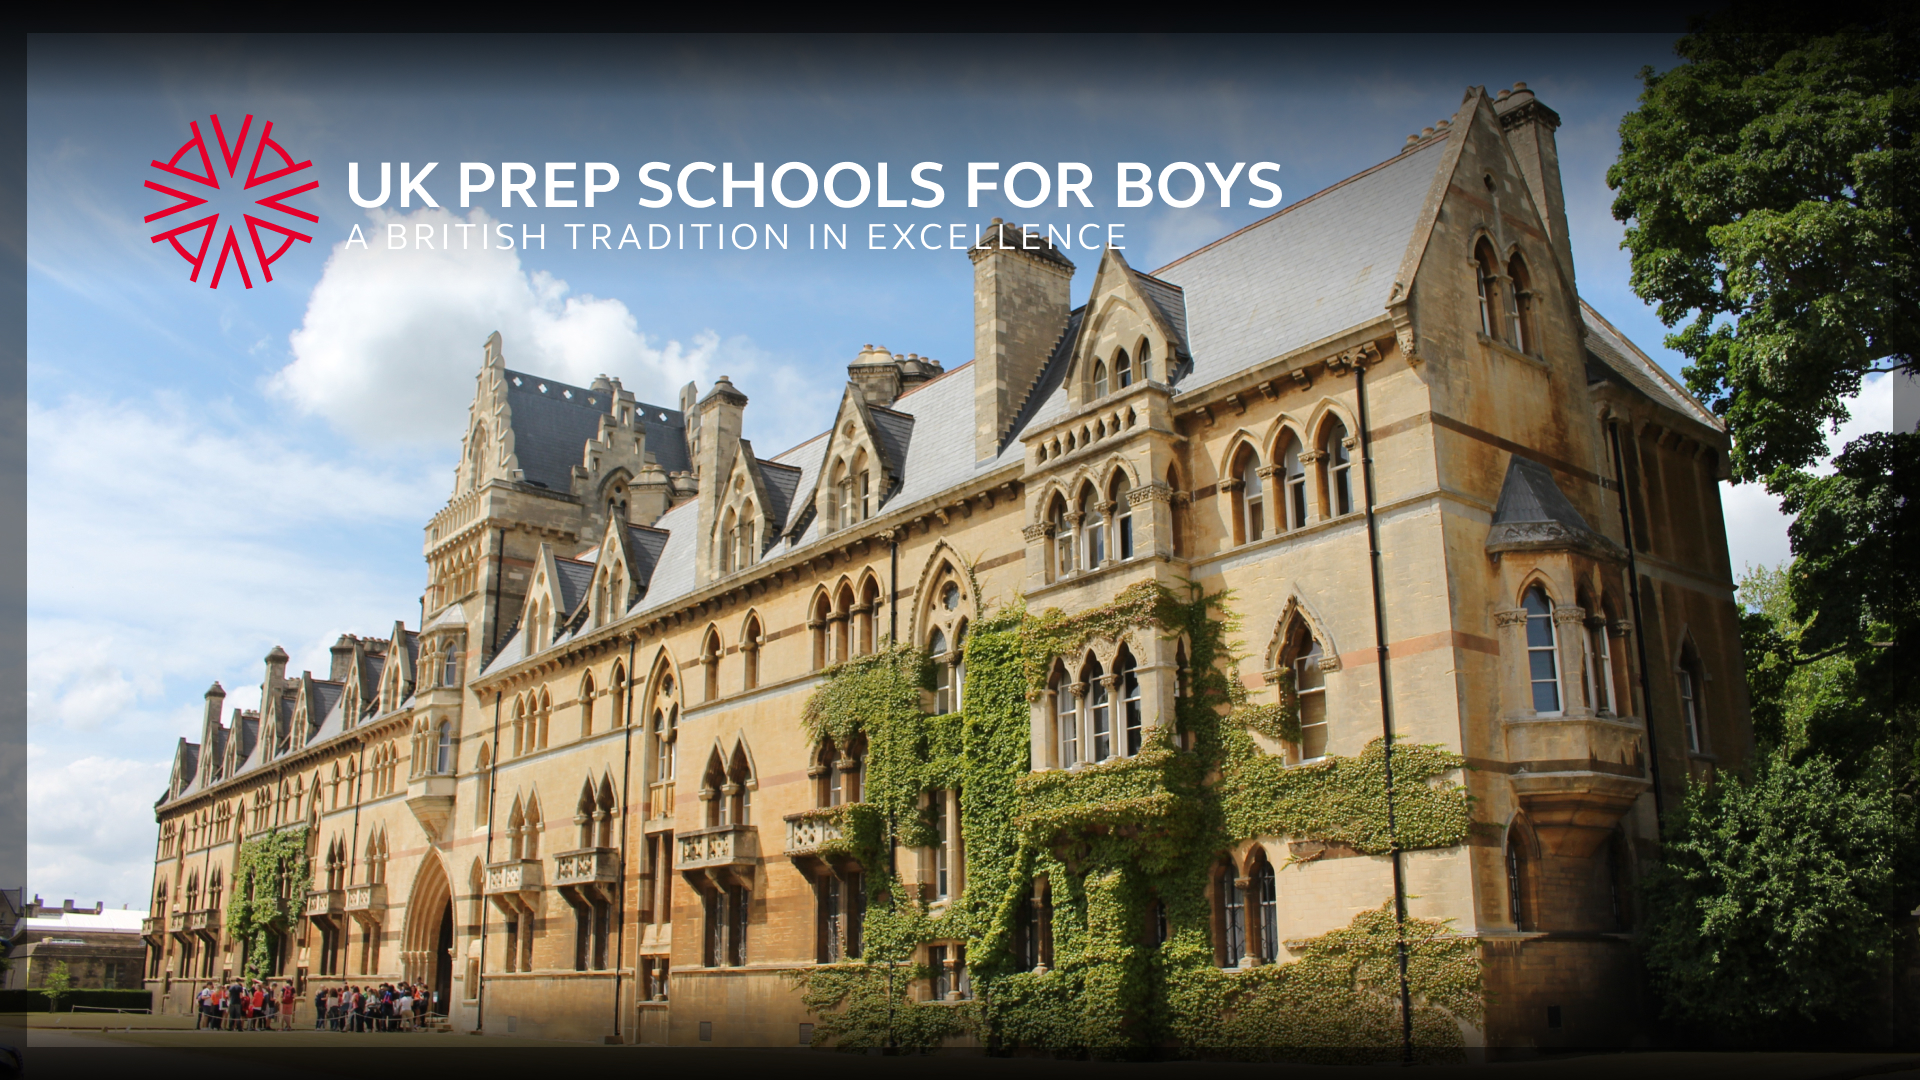 An impressive English building that is one of the UK's best prep schools